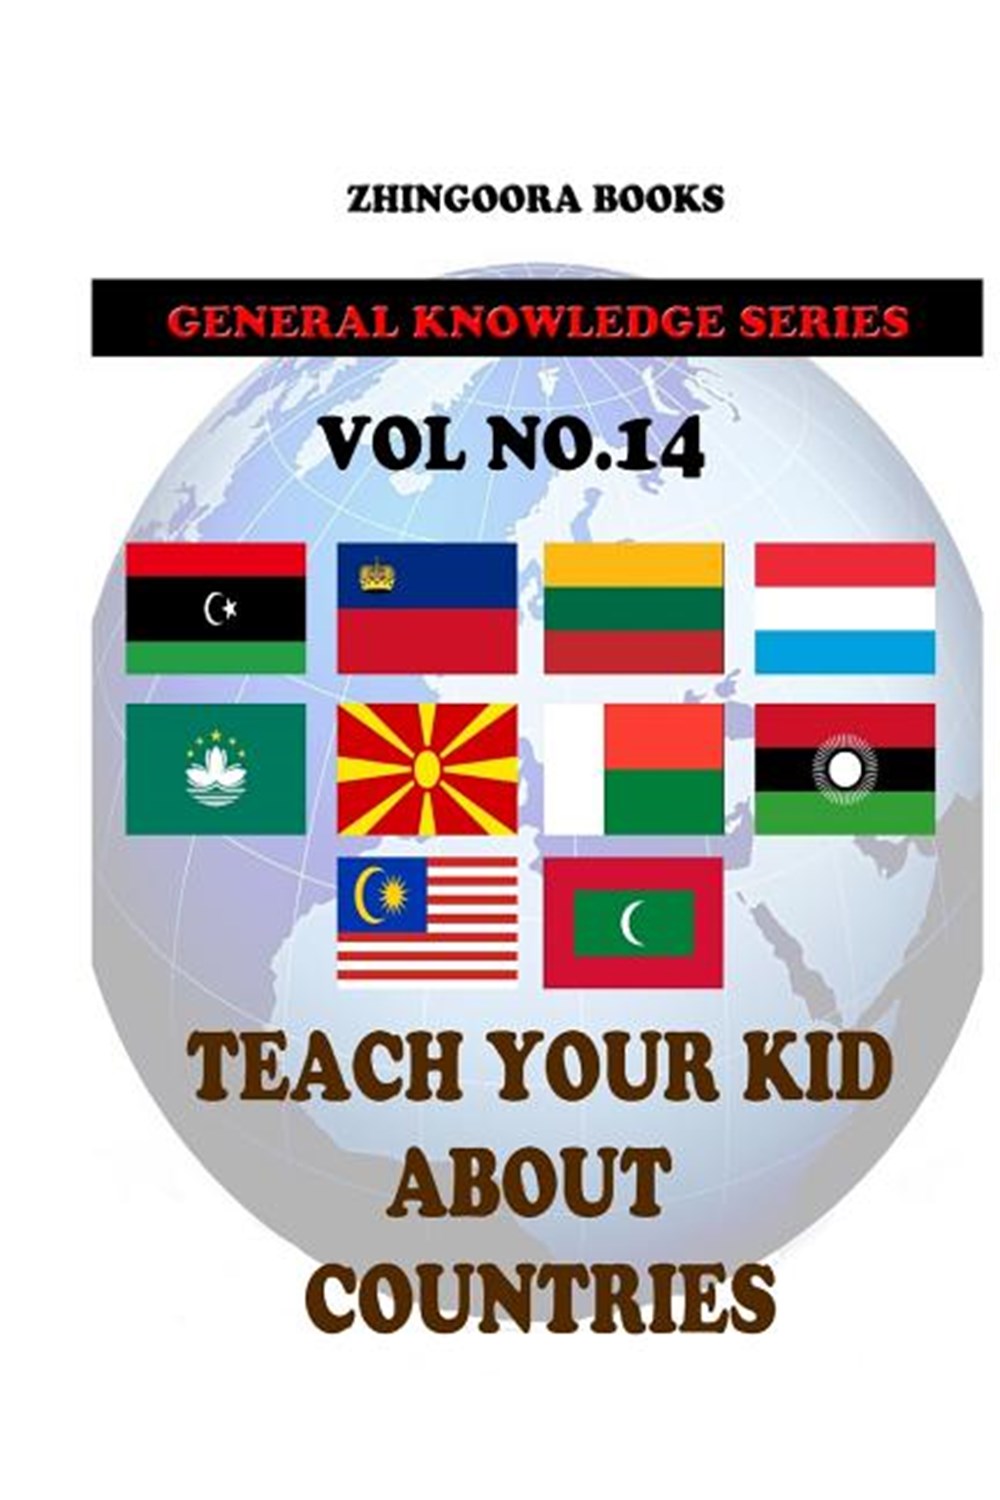 Teach Your Kids About Countries [Vol 5]